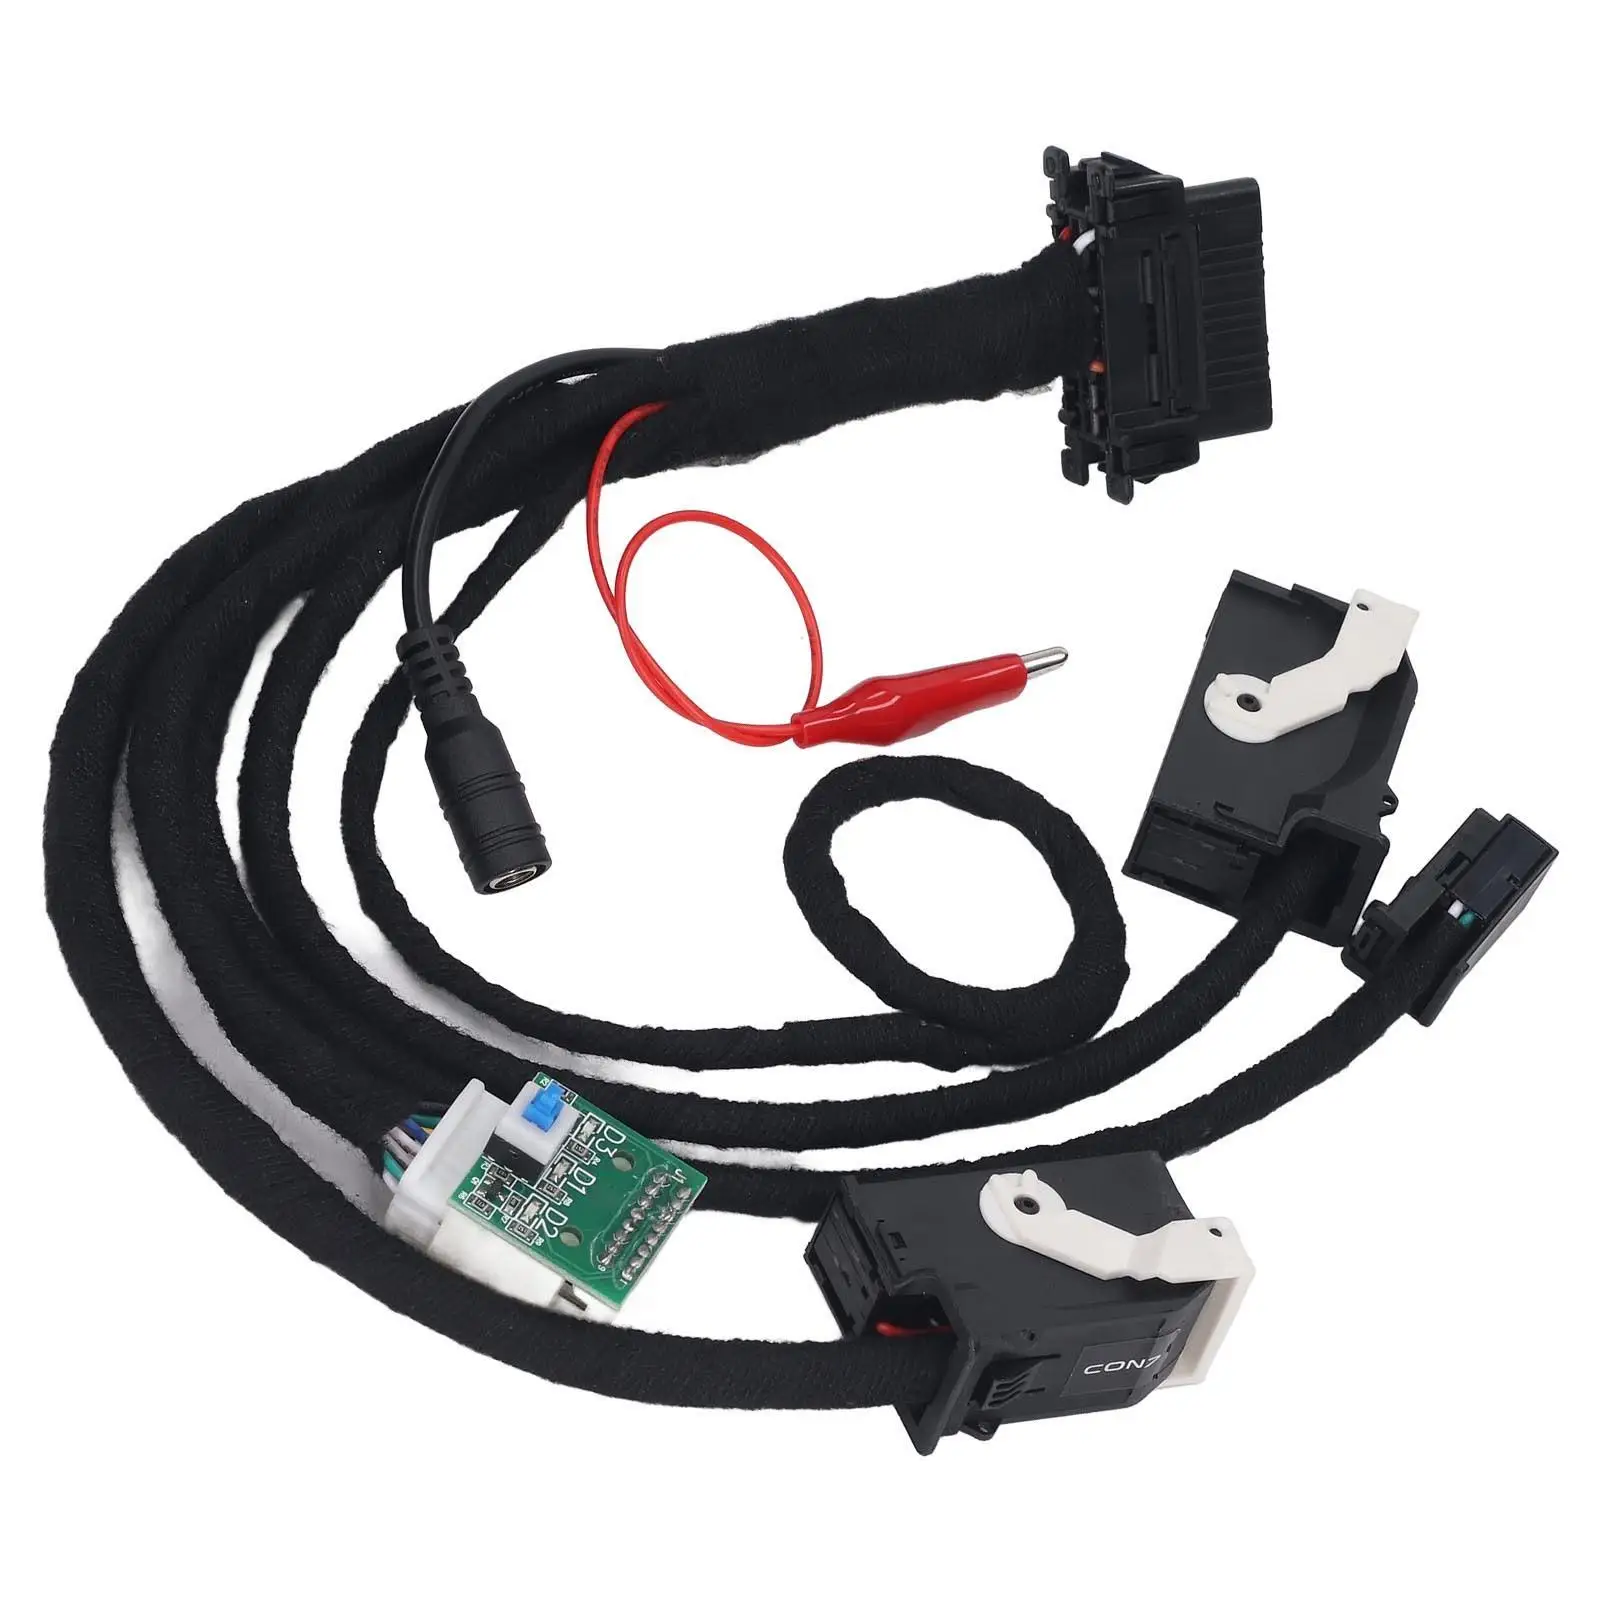 

FEM BDC Tester Cable for Key Programmer - High Efficiency & Convenient Test Cable for f20 F30 F35 X5 X6 I3 - Easy To Carry